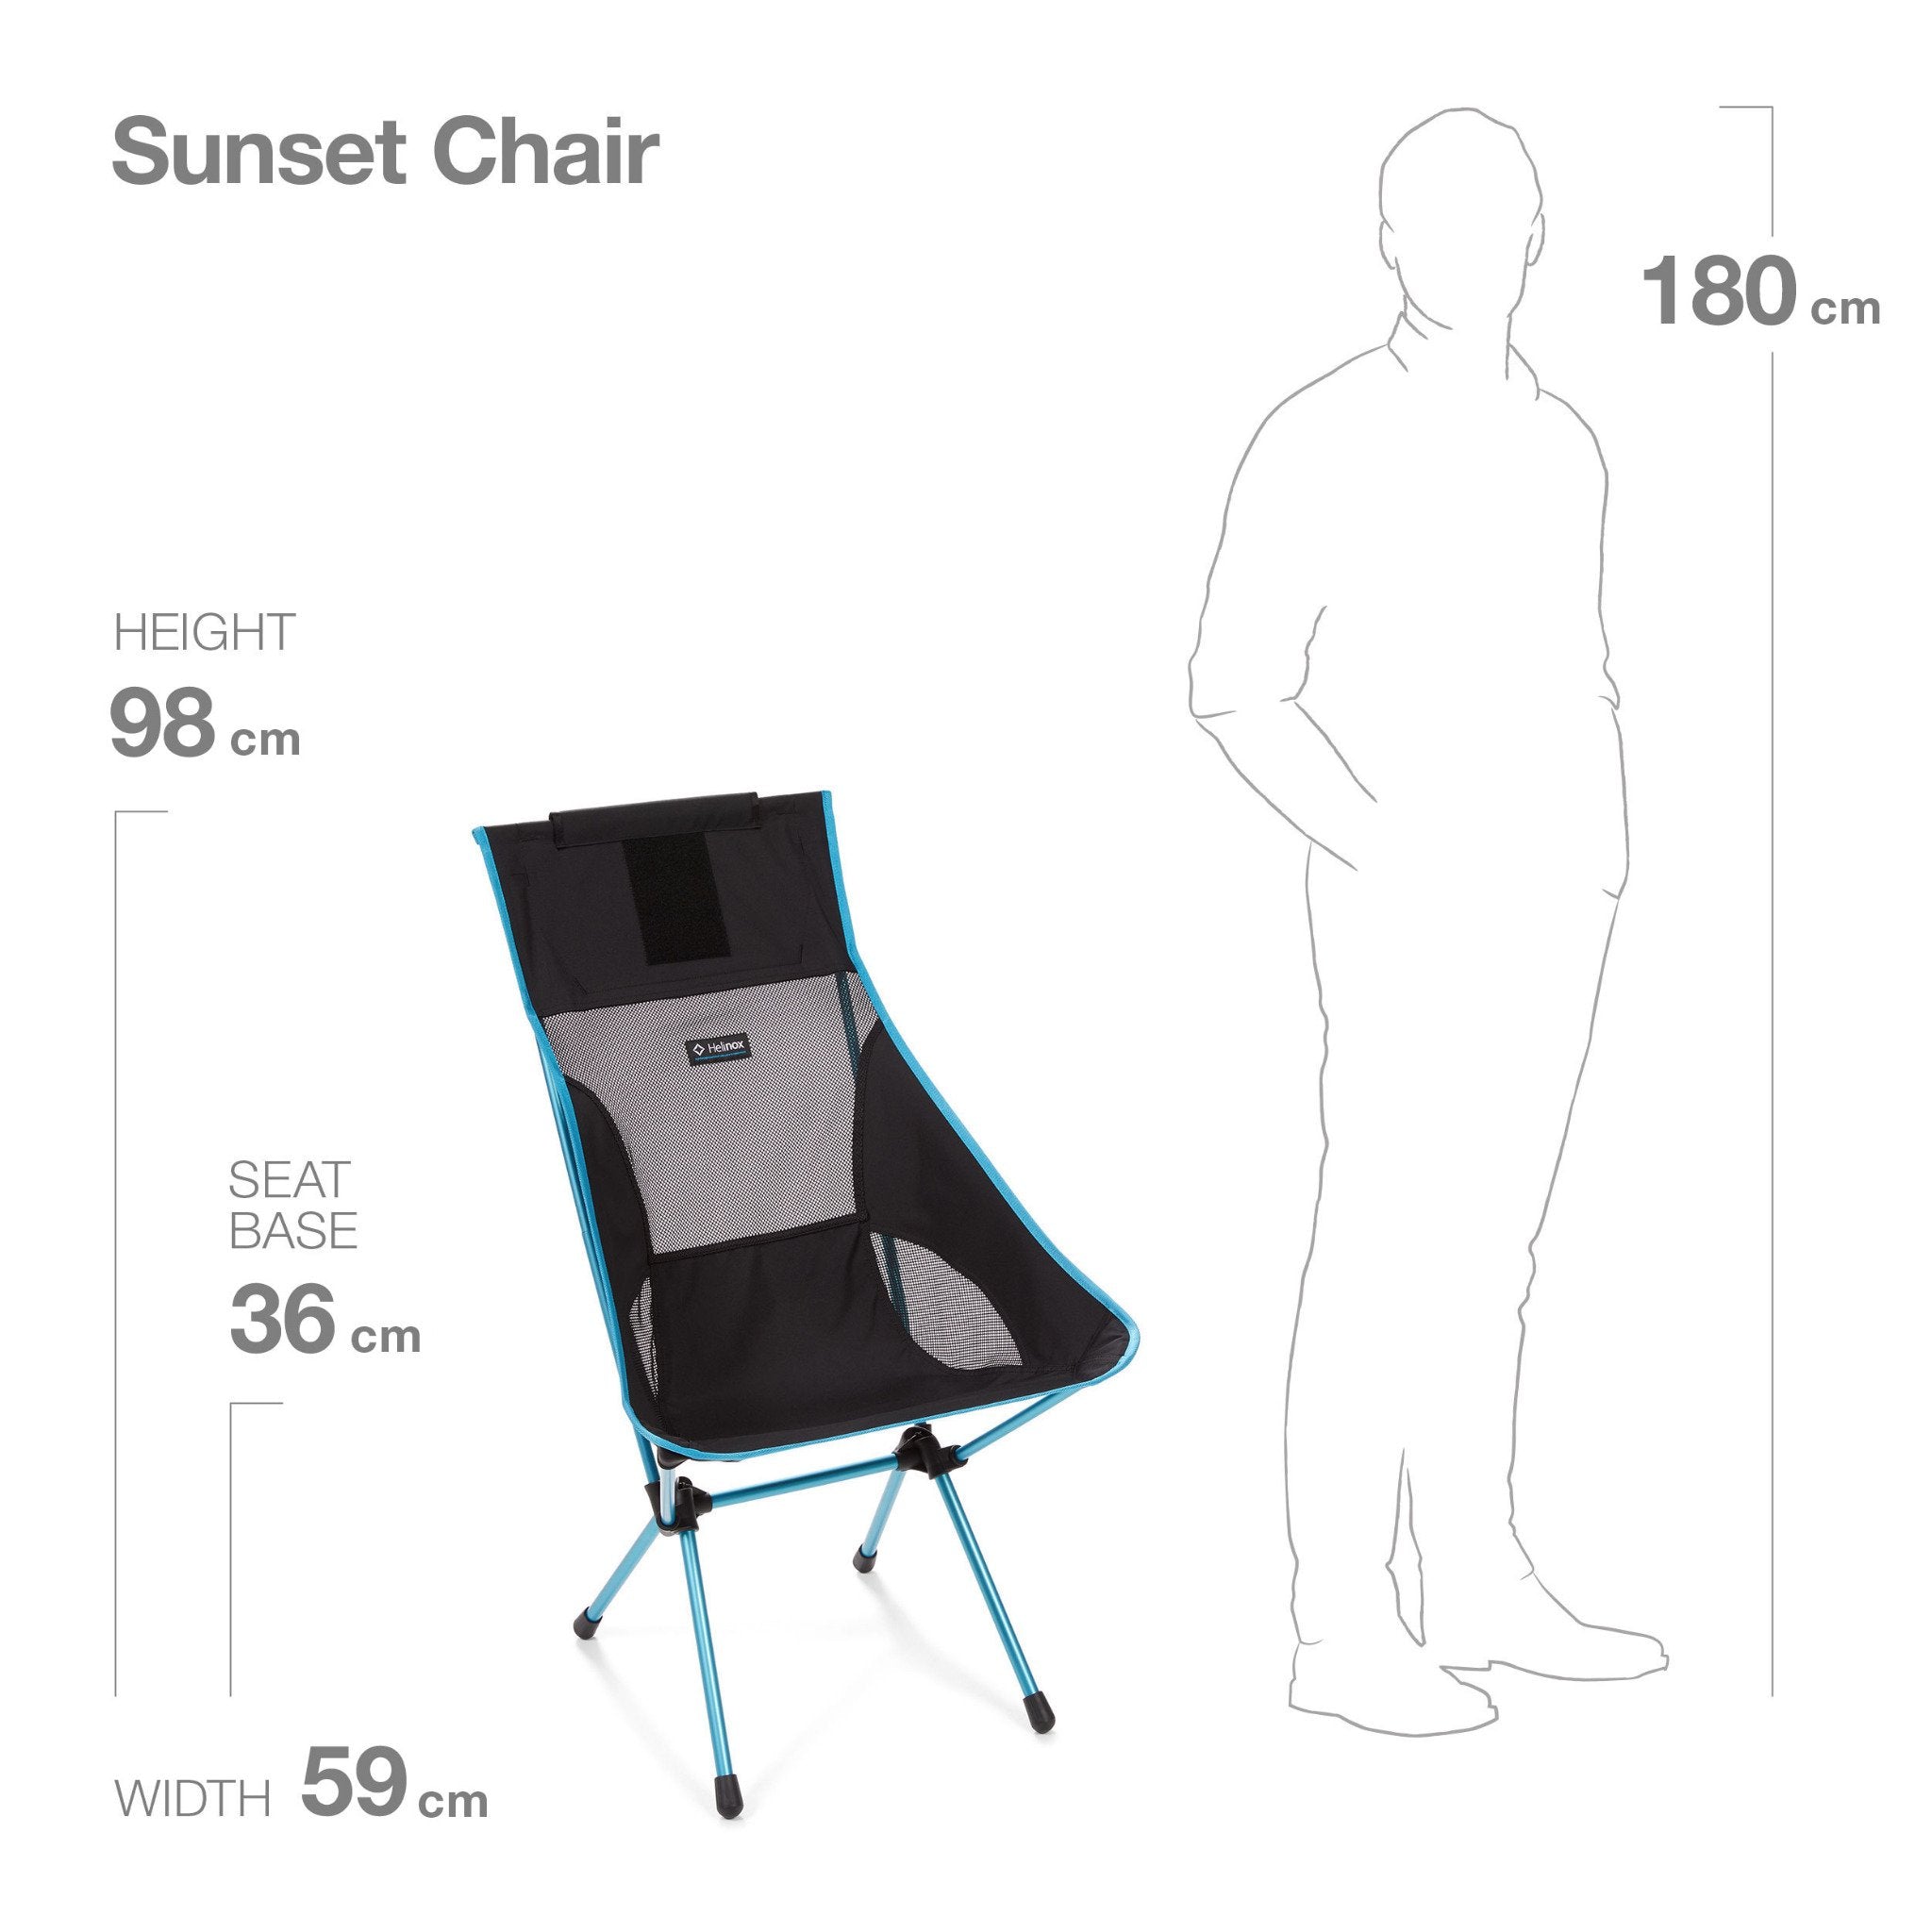 Helinox Sunset Chair Overview